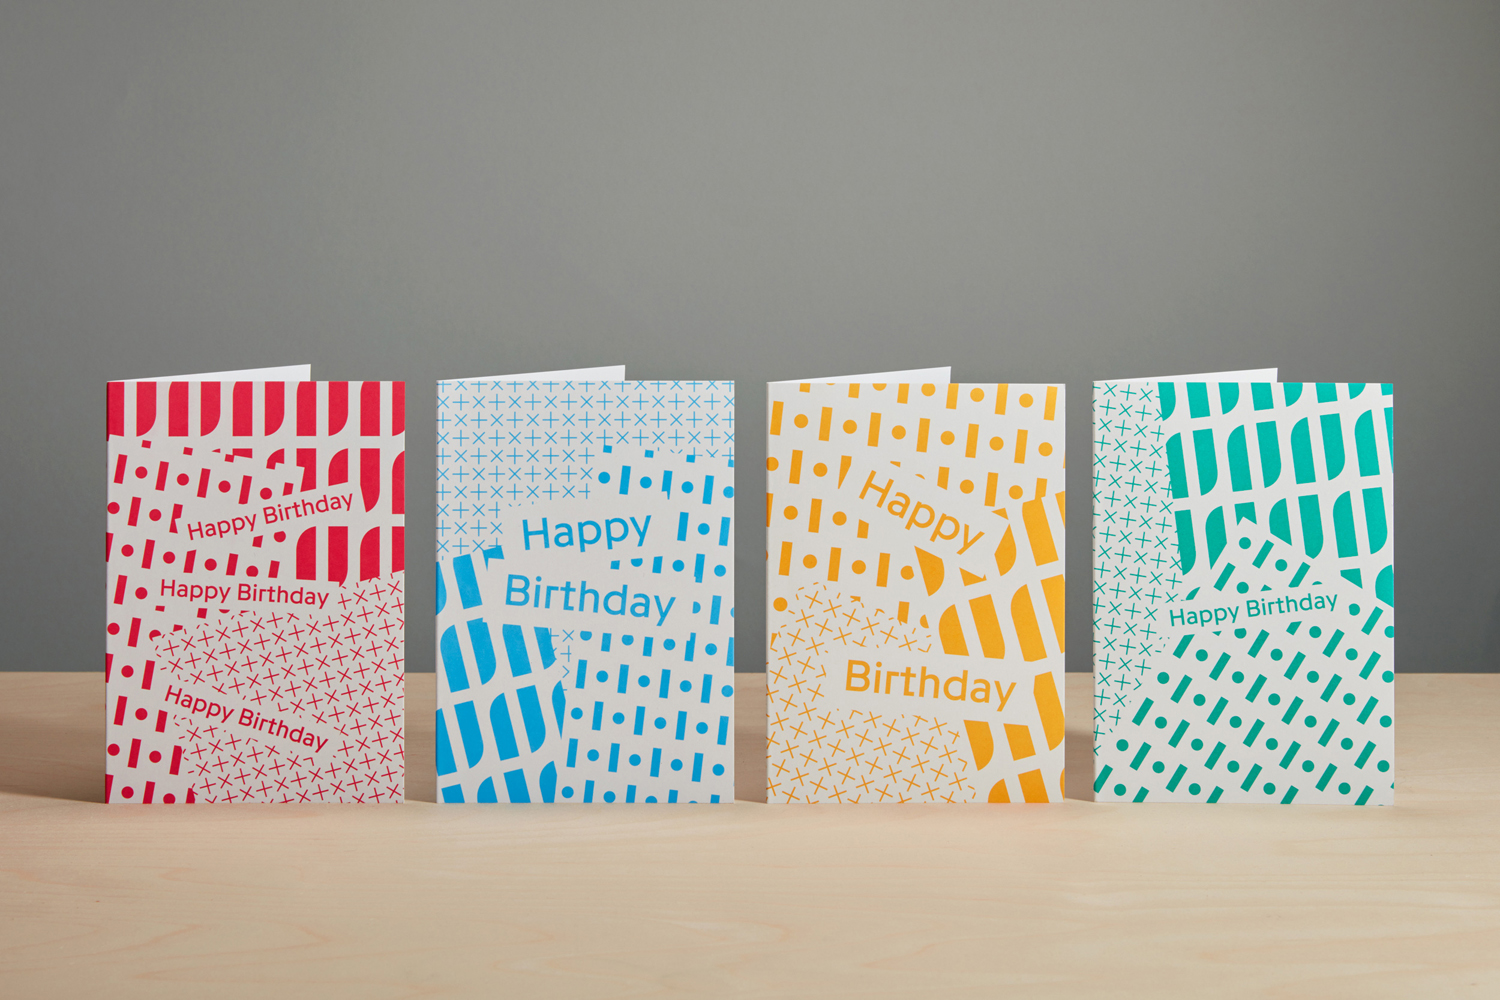 Brand identity and birthday cards designed by London-based studio Spy for catering business H+J